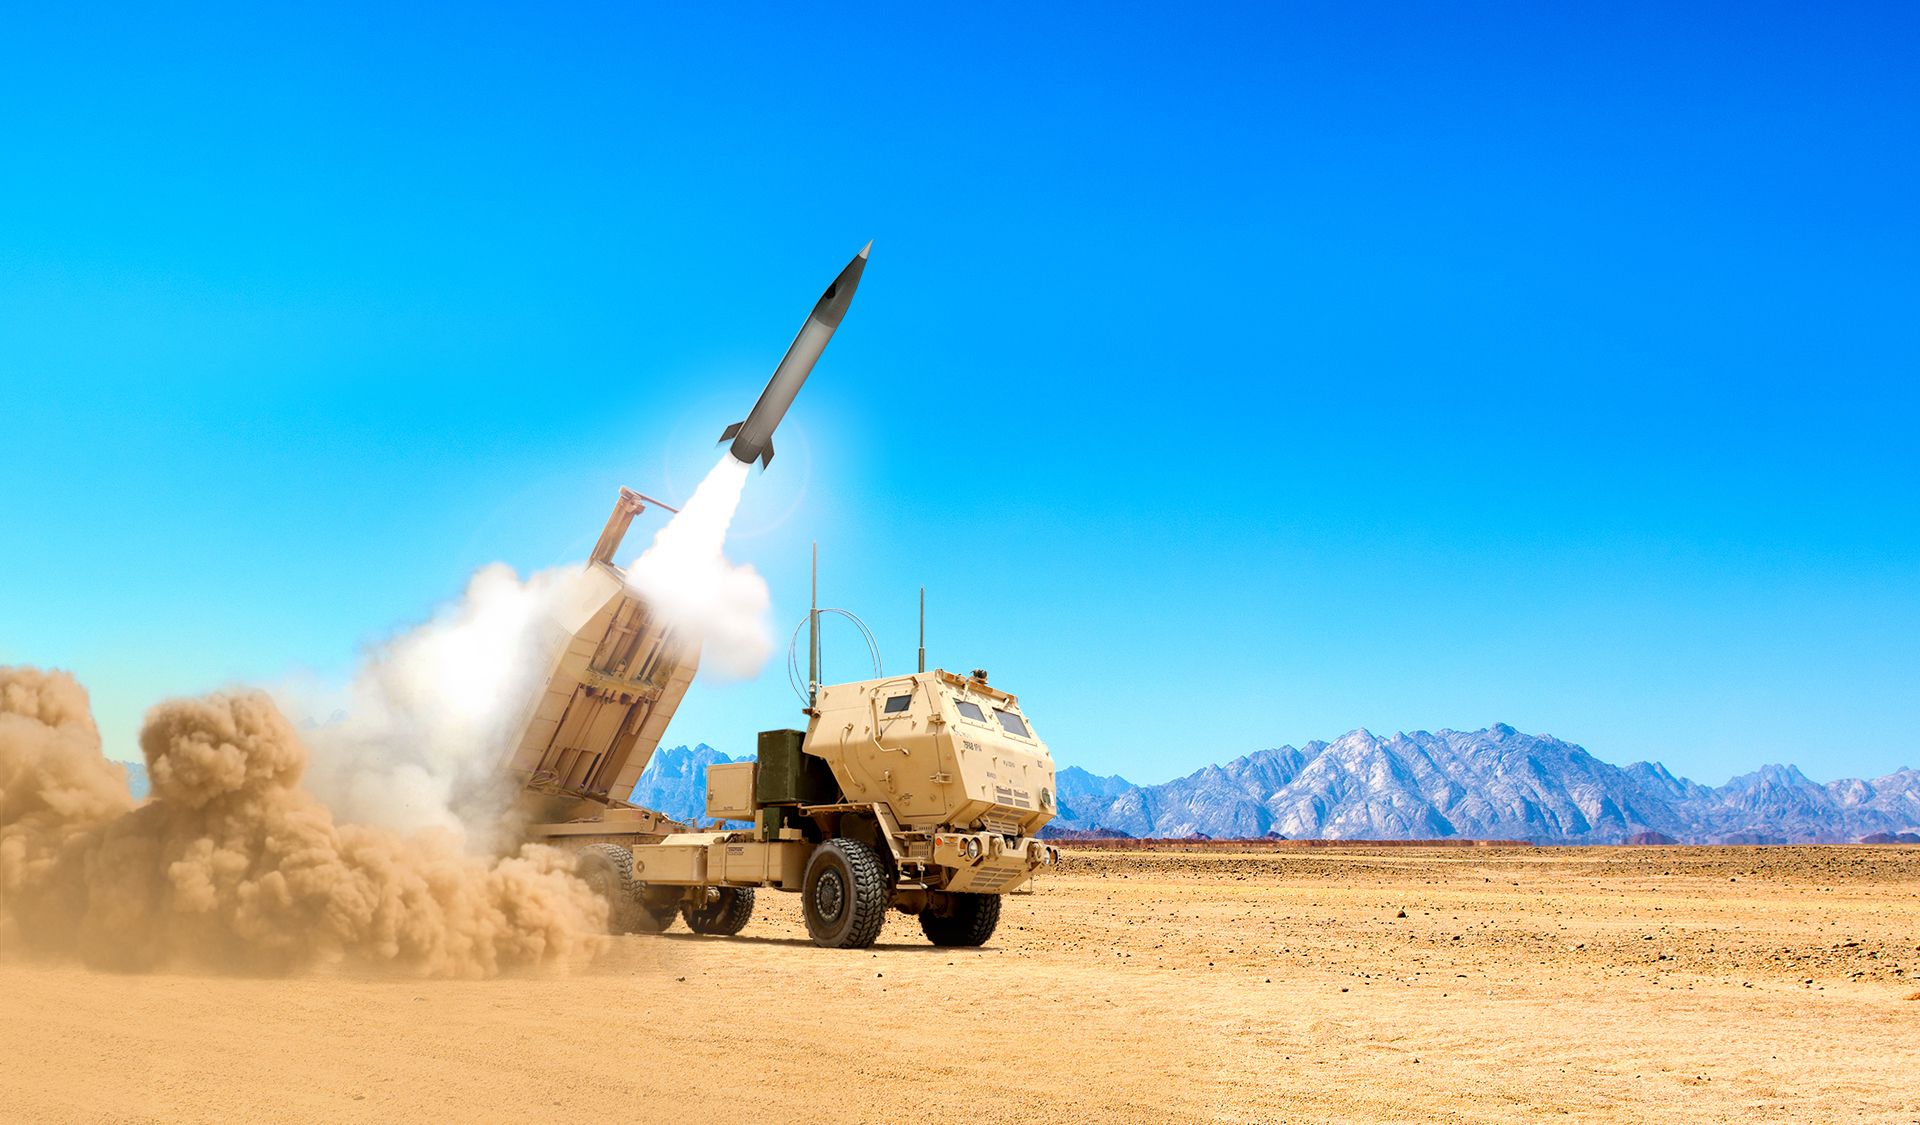 US Army requests $384m to buy 110 PrSM missiles with 500km launch range for HIMARS and MLRS